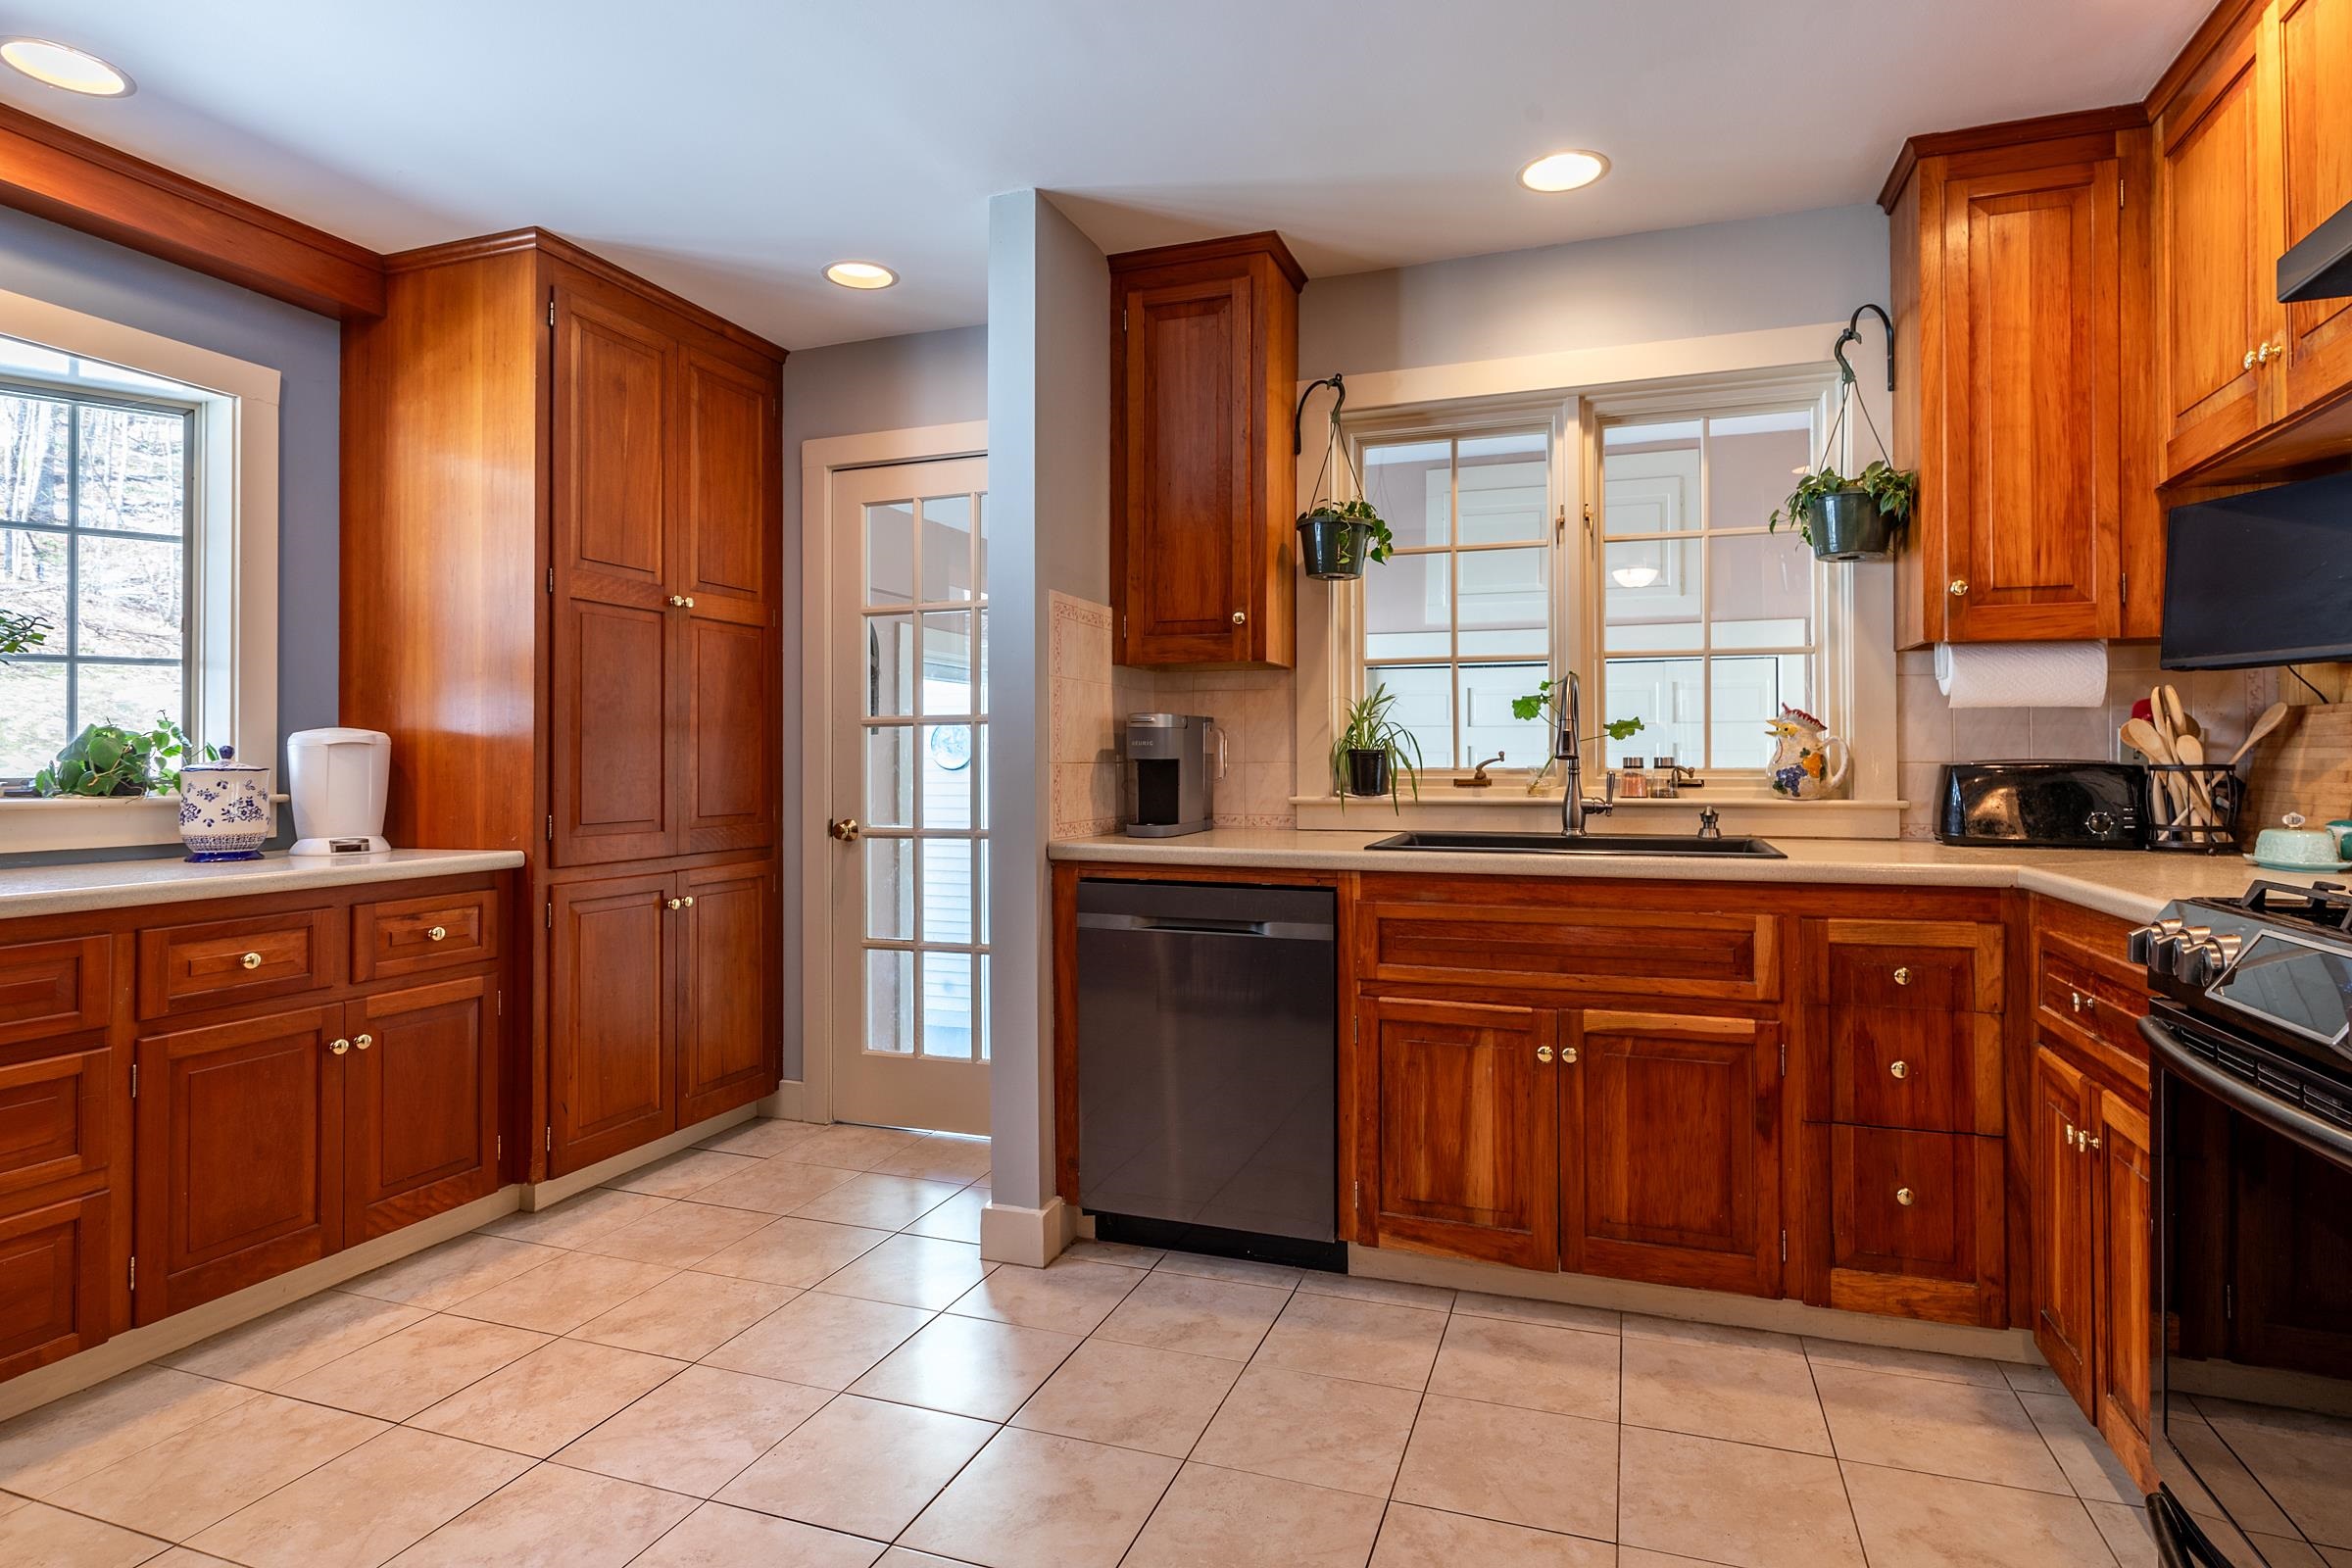 A bright kitchen with cherry cabinets